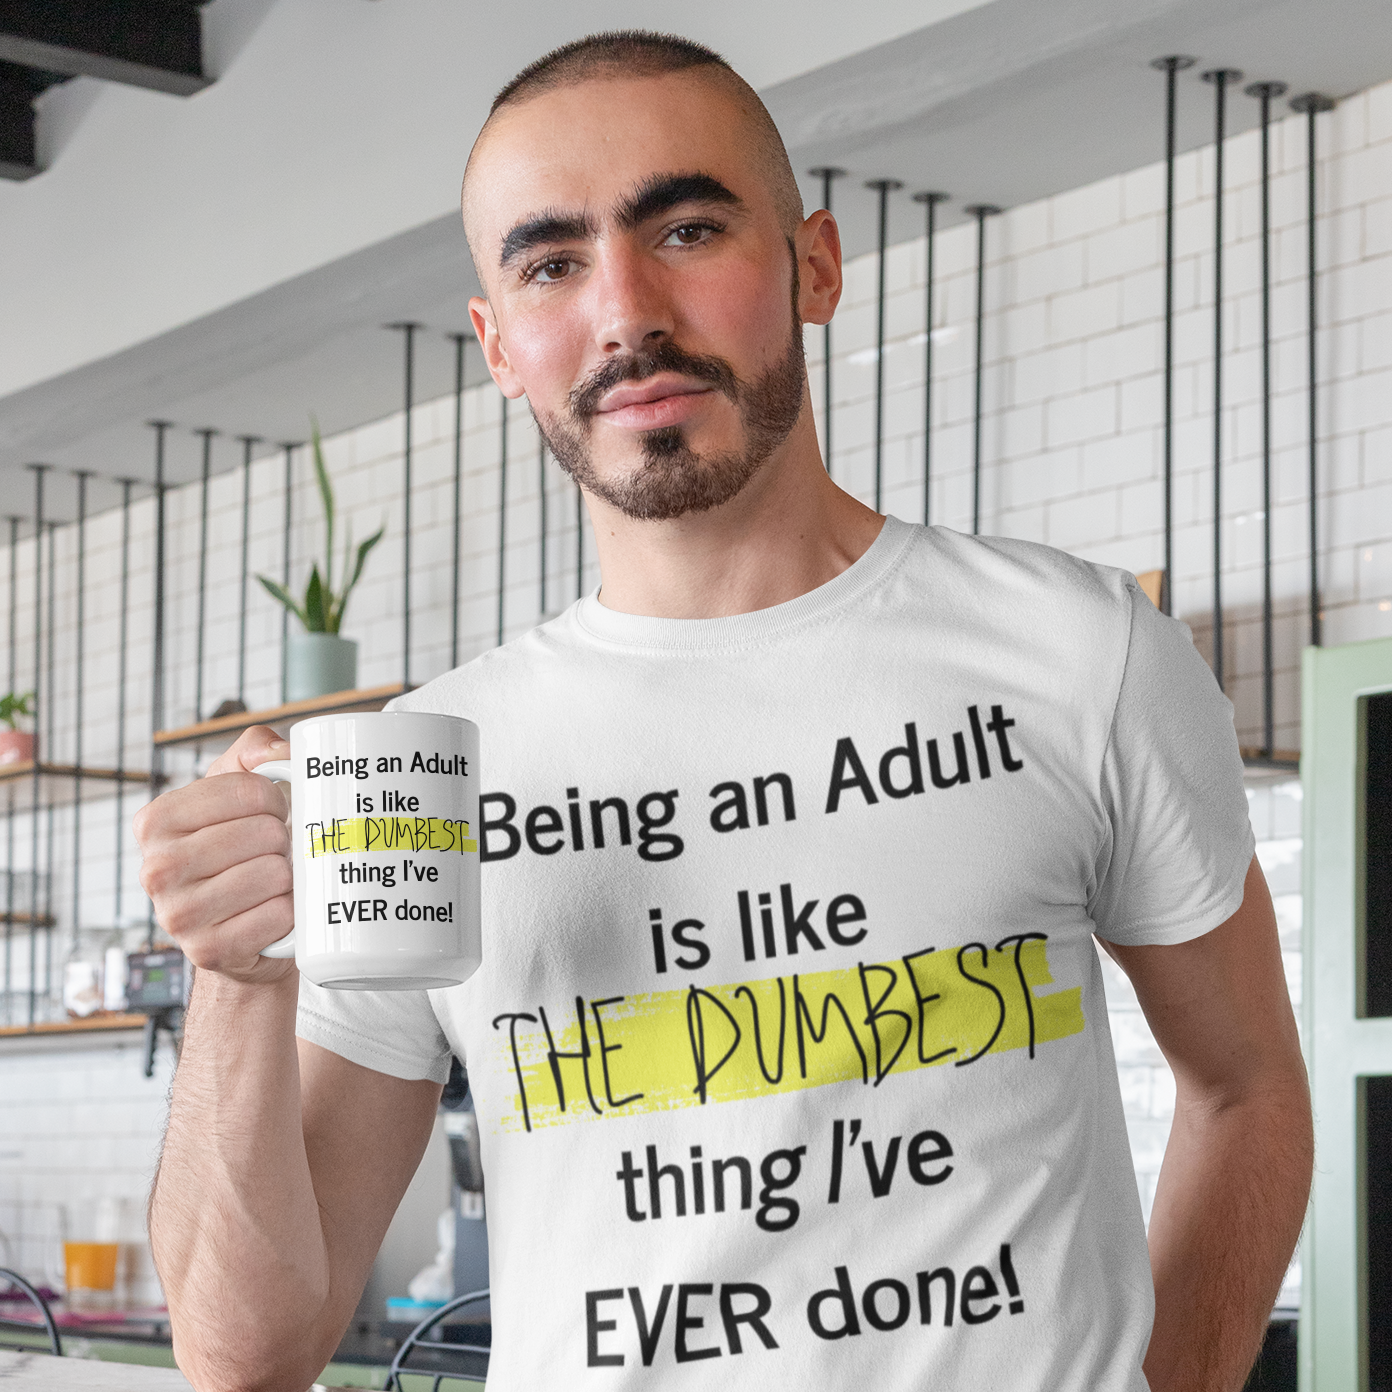 Being an Adult is like THE Dumbest thing I've EVER Done! - 15oz ceramic mug